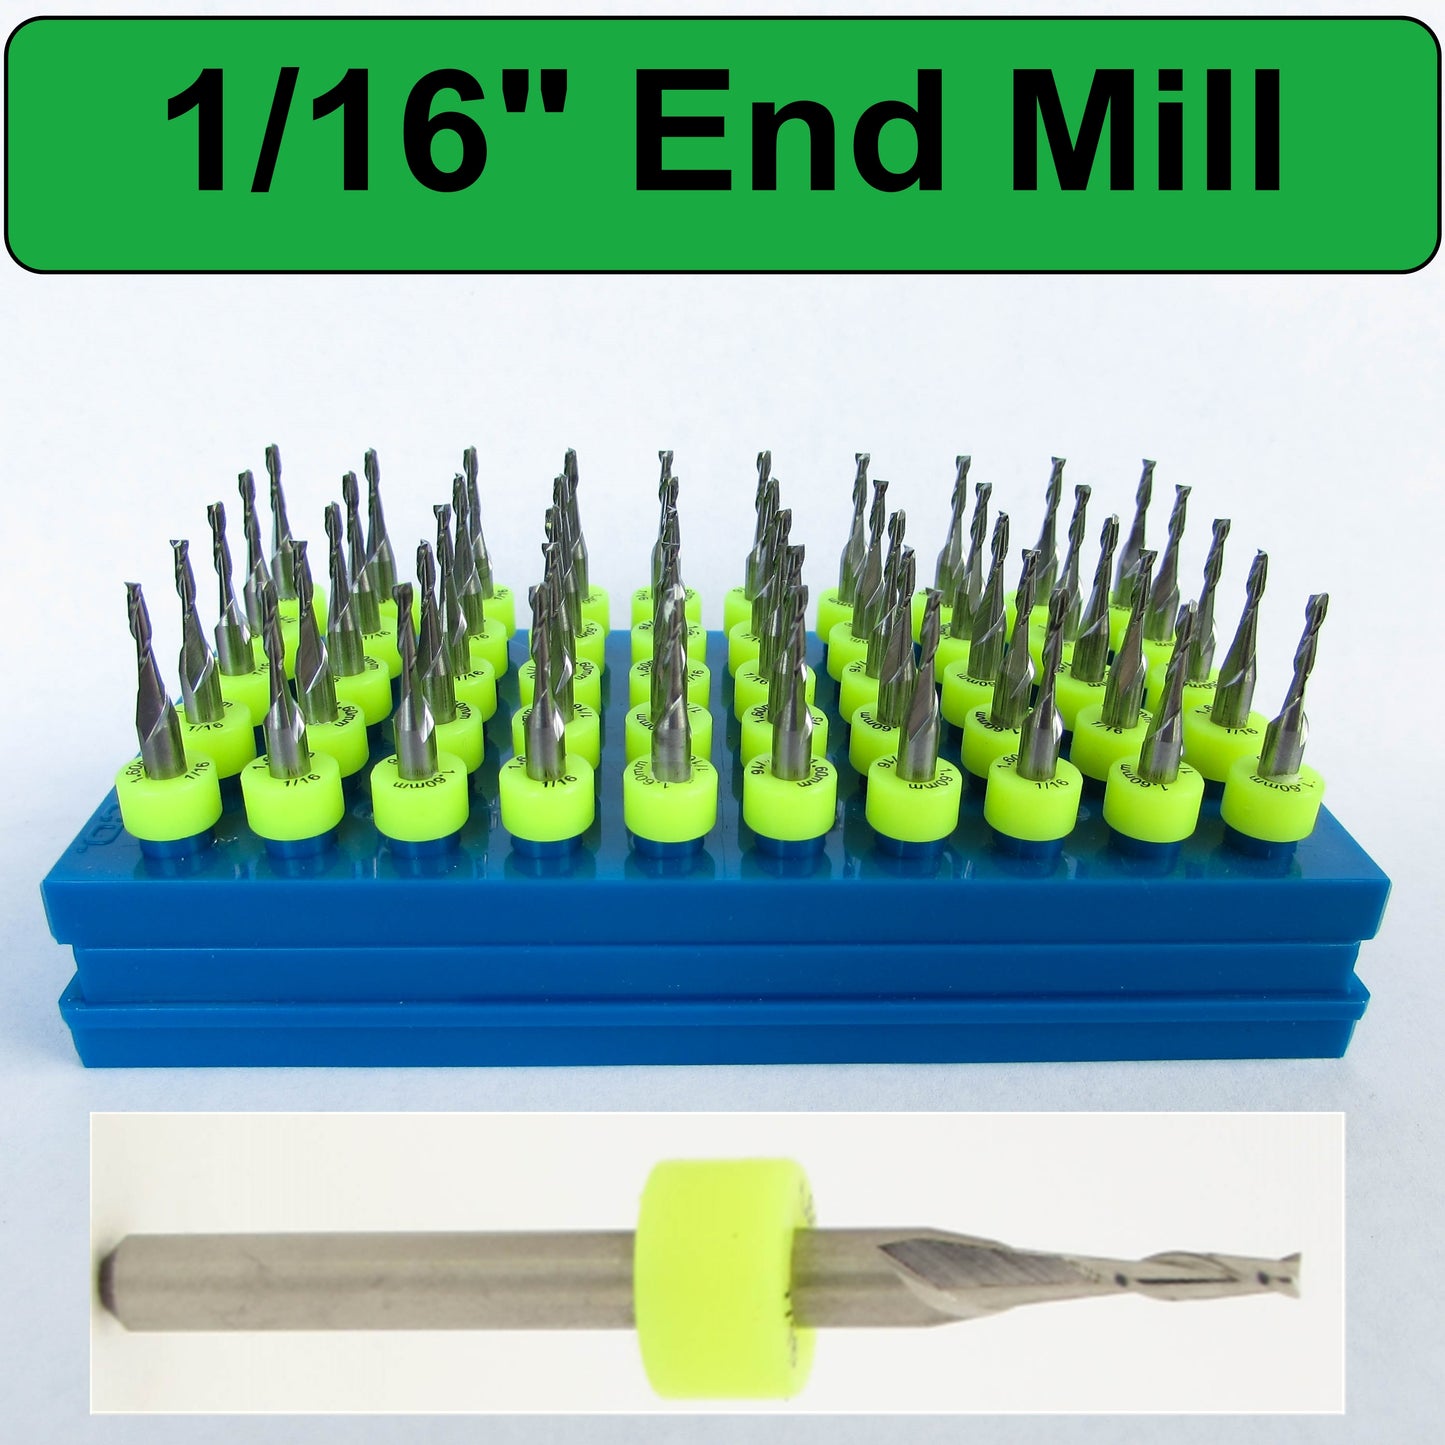 Fifty Pieces 1/16" Two Flute End Mill - Square End, Up Cut,  Solid Carbide - Super Value - UMT114